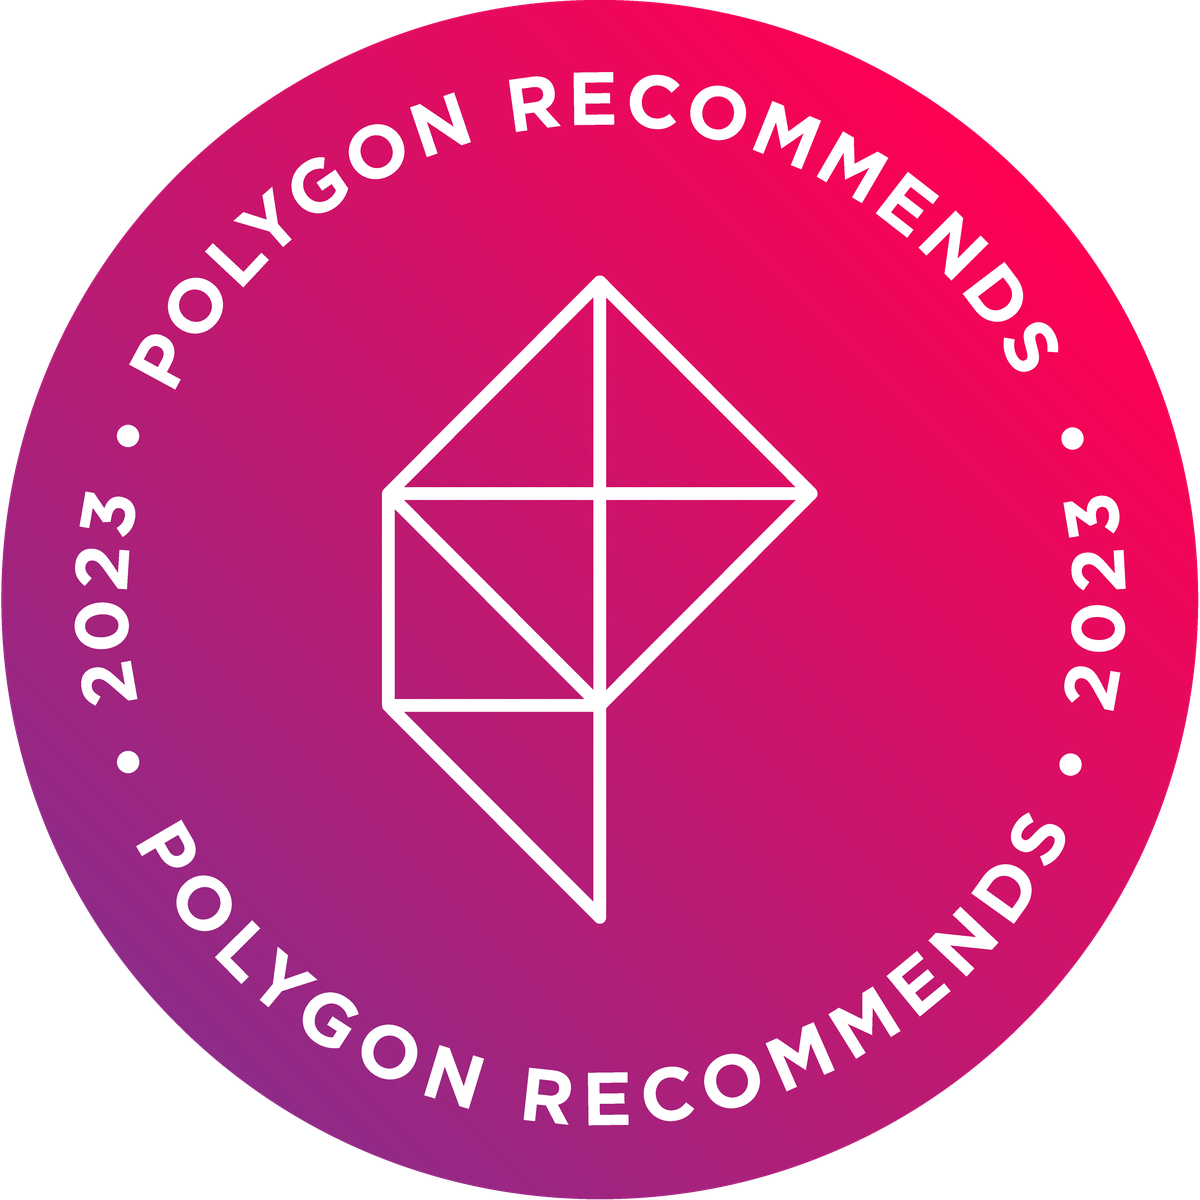 The badge for Polygon Recommends 2023 winners across video games, tabletop games, movies, and TV